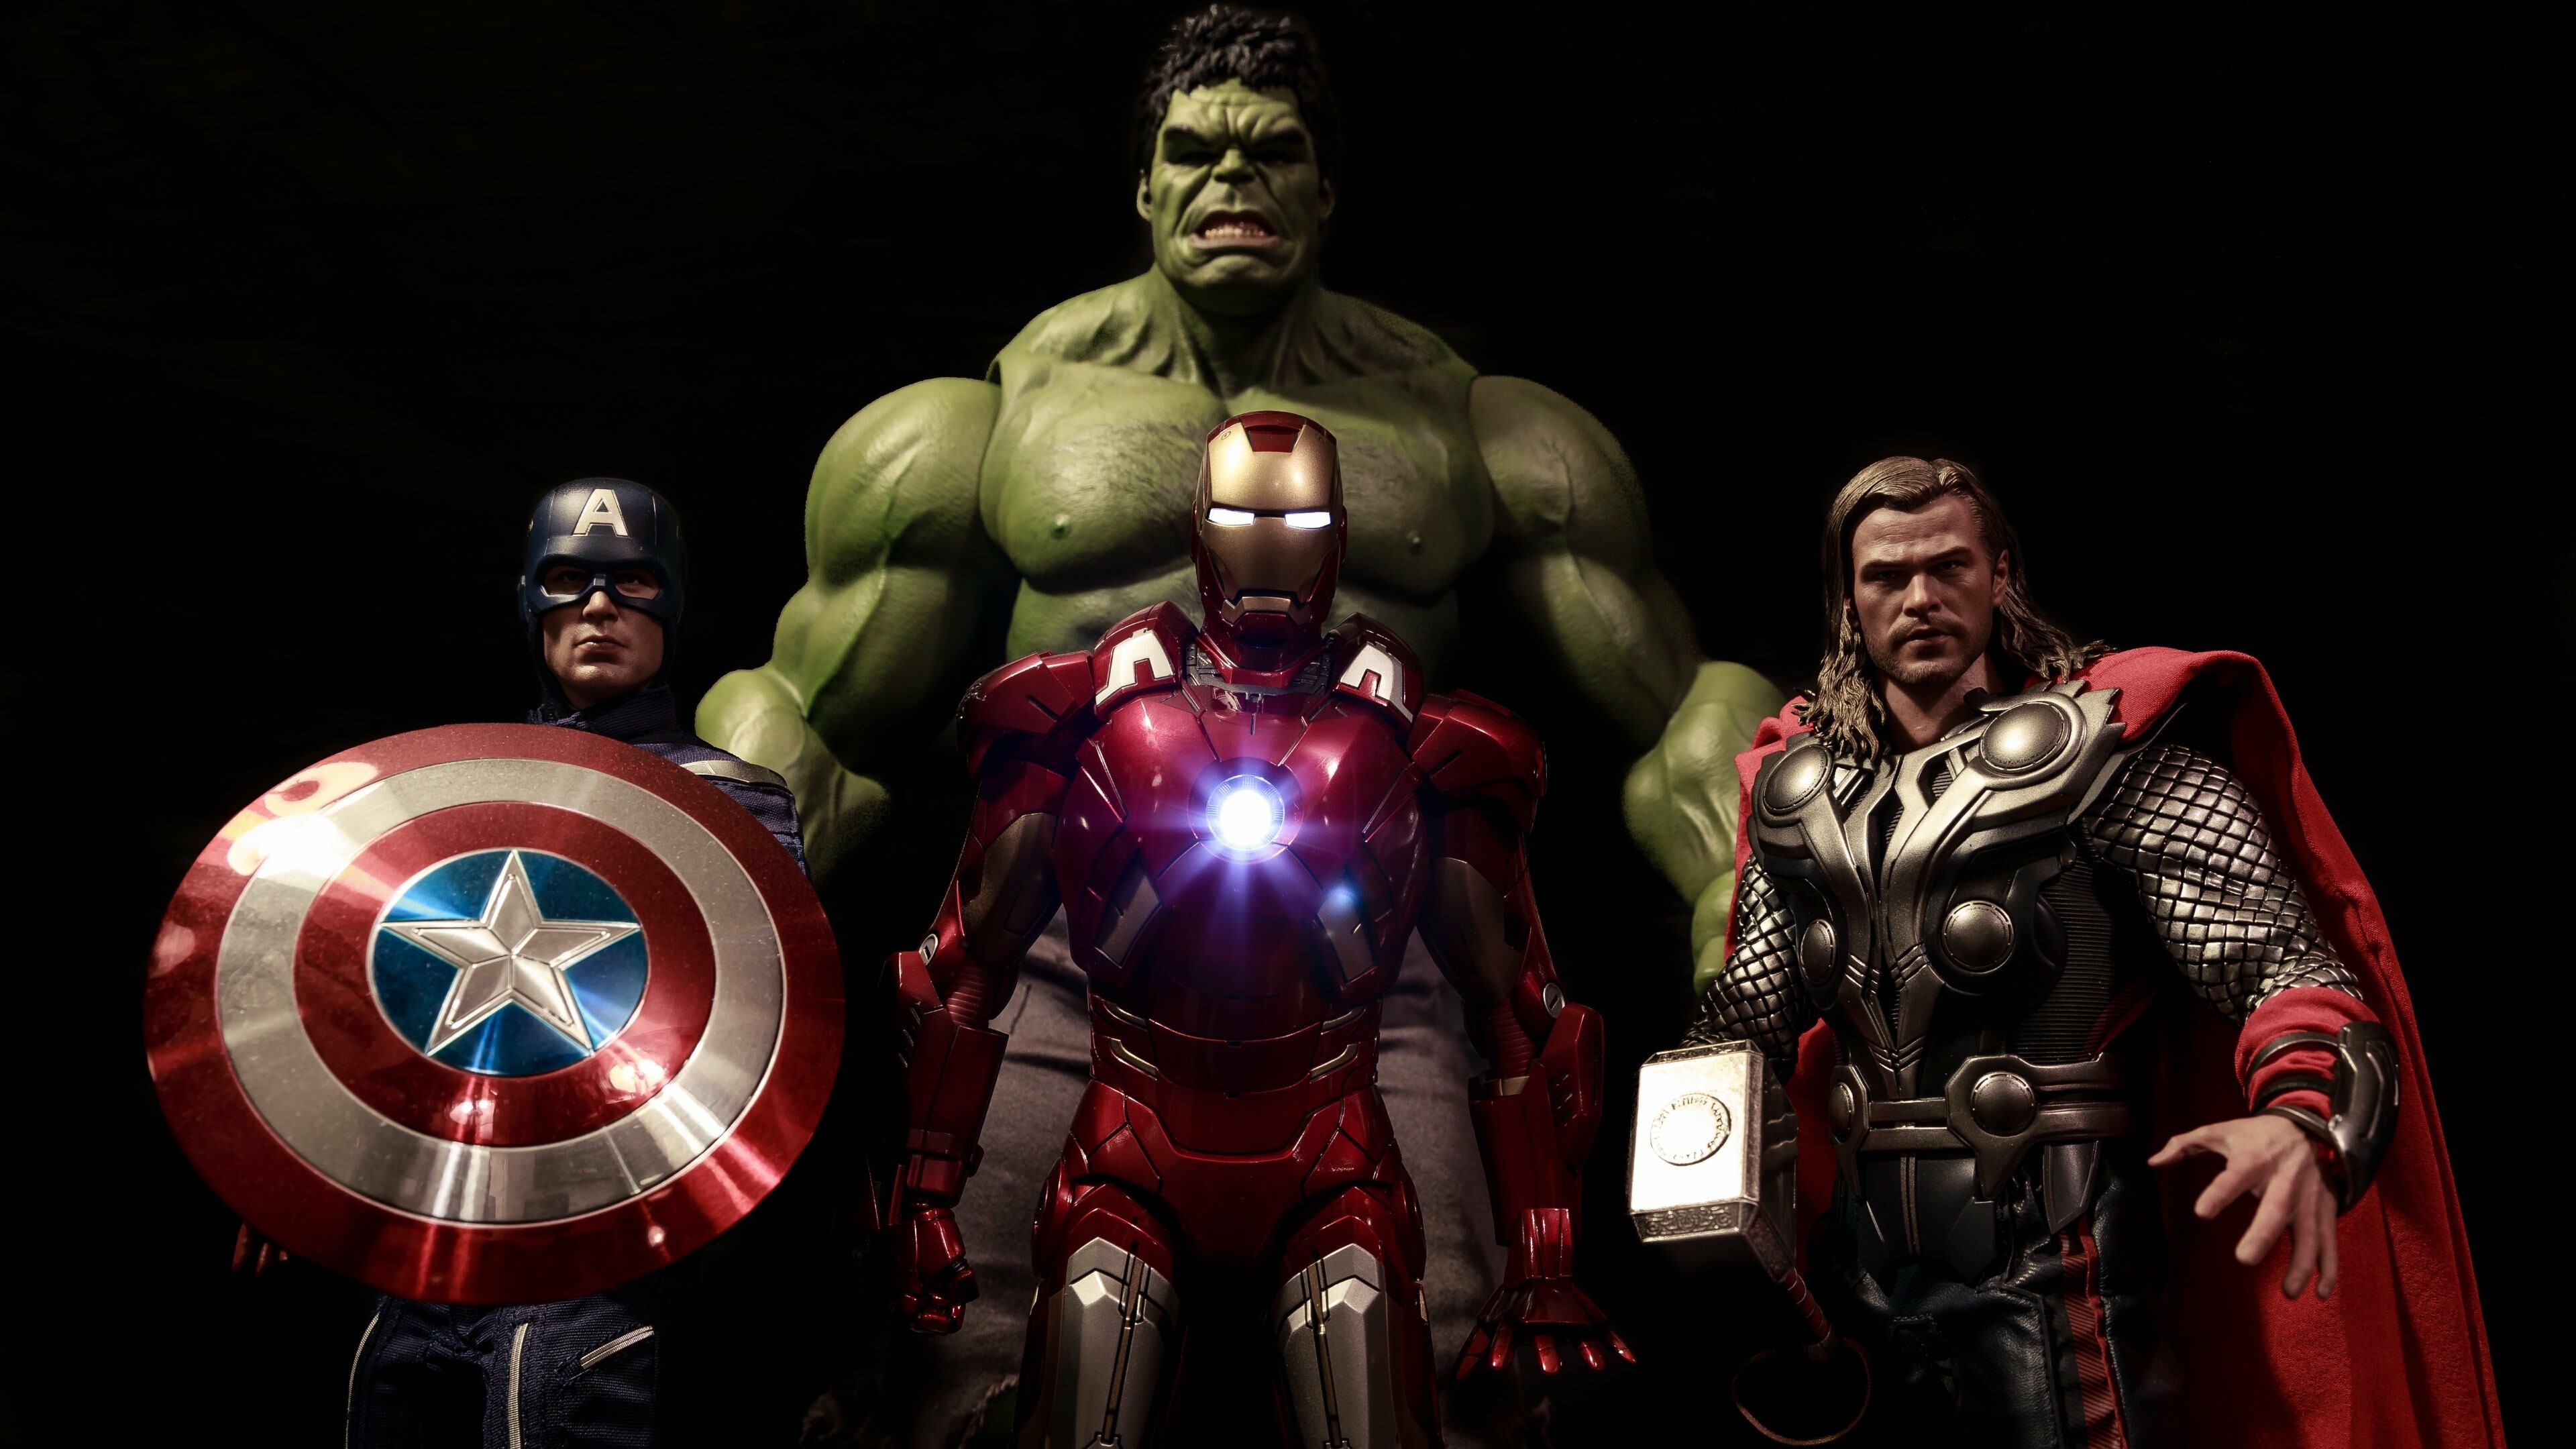 Avengers: The 11th film in the Marvel Cinematic Universe, Written and directed by Joss Whedon. 3840x2160 4K Wallpaper.